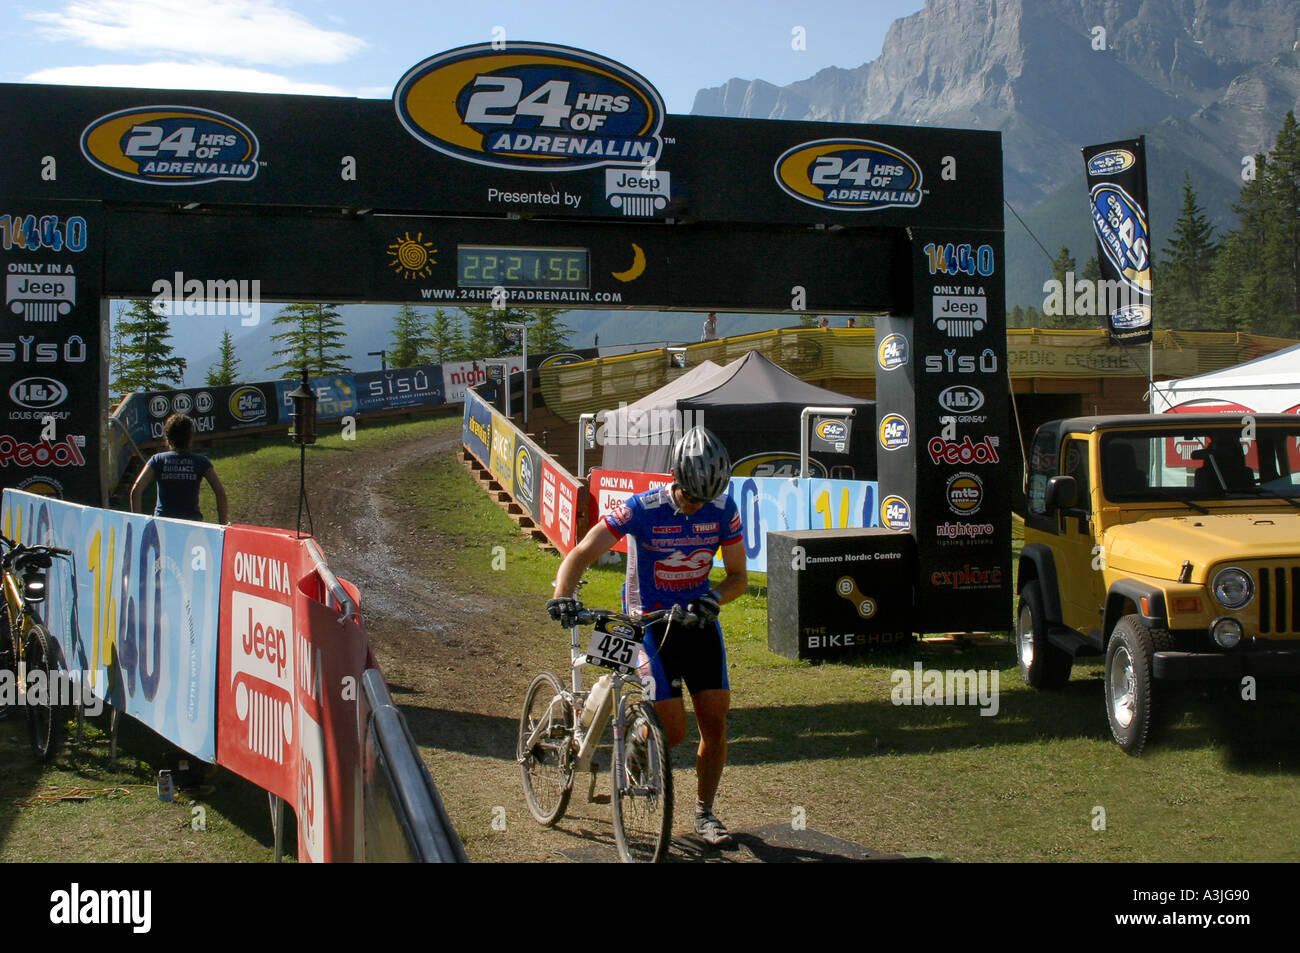 Bicycle racing 24 Hours of Adrenalin crossing the finish line a job well done Stock Photo